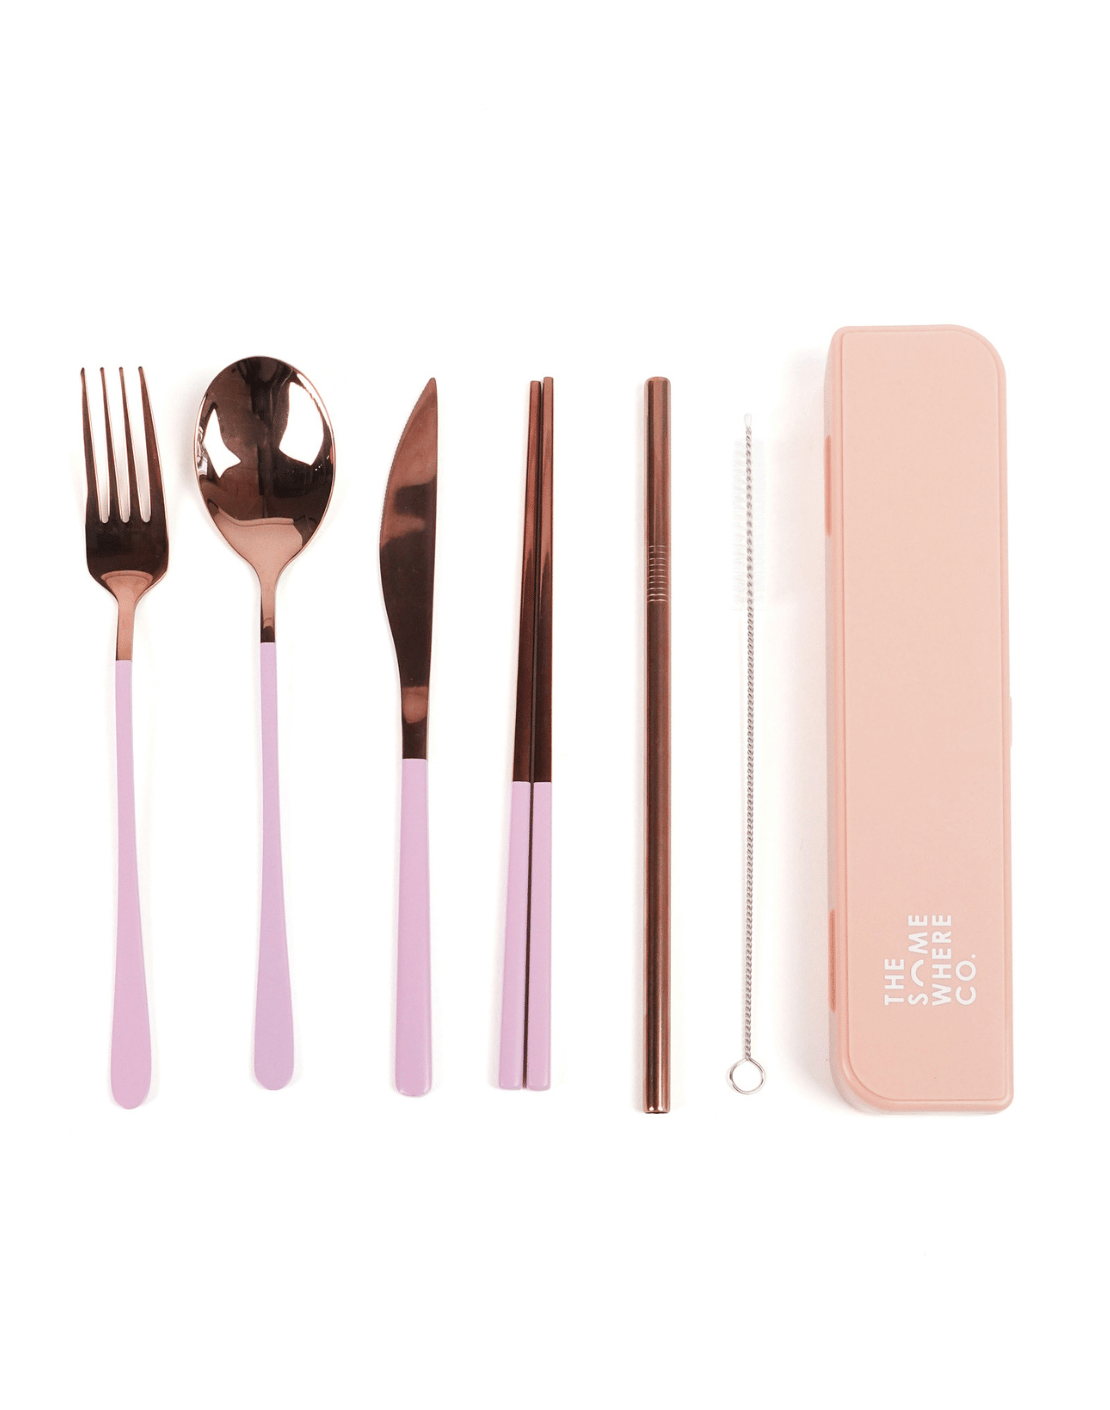 Cutlery Kit - Rose Gold with Lilac Handle (PRE-ORDER)